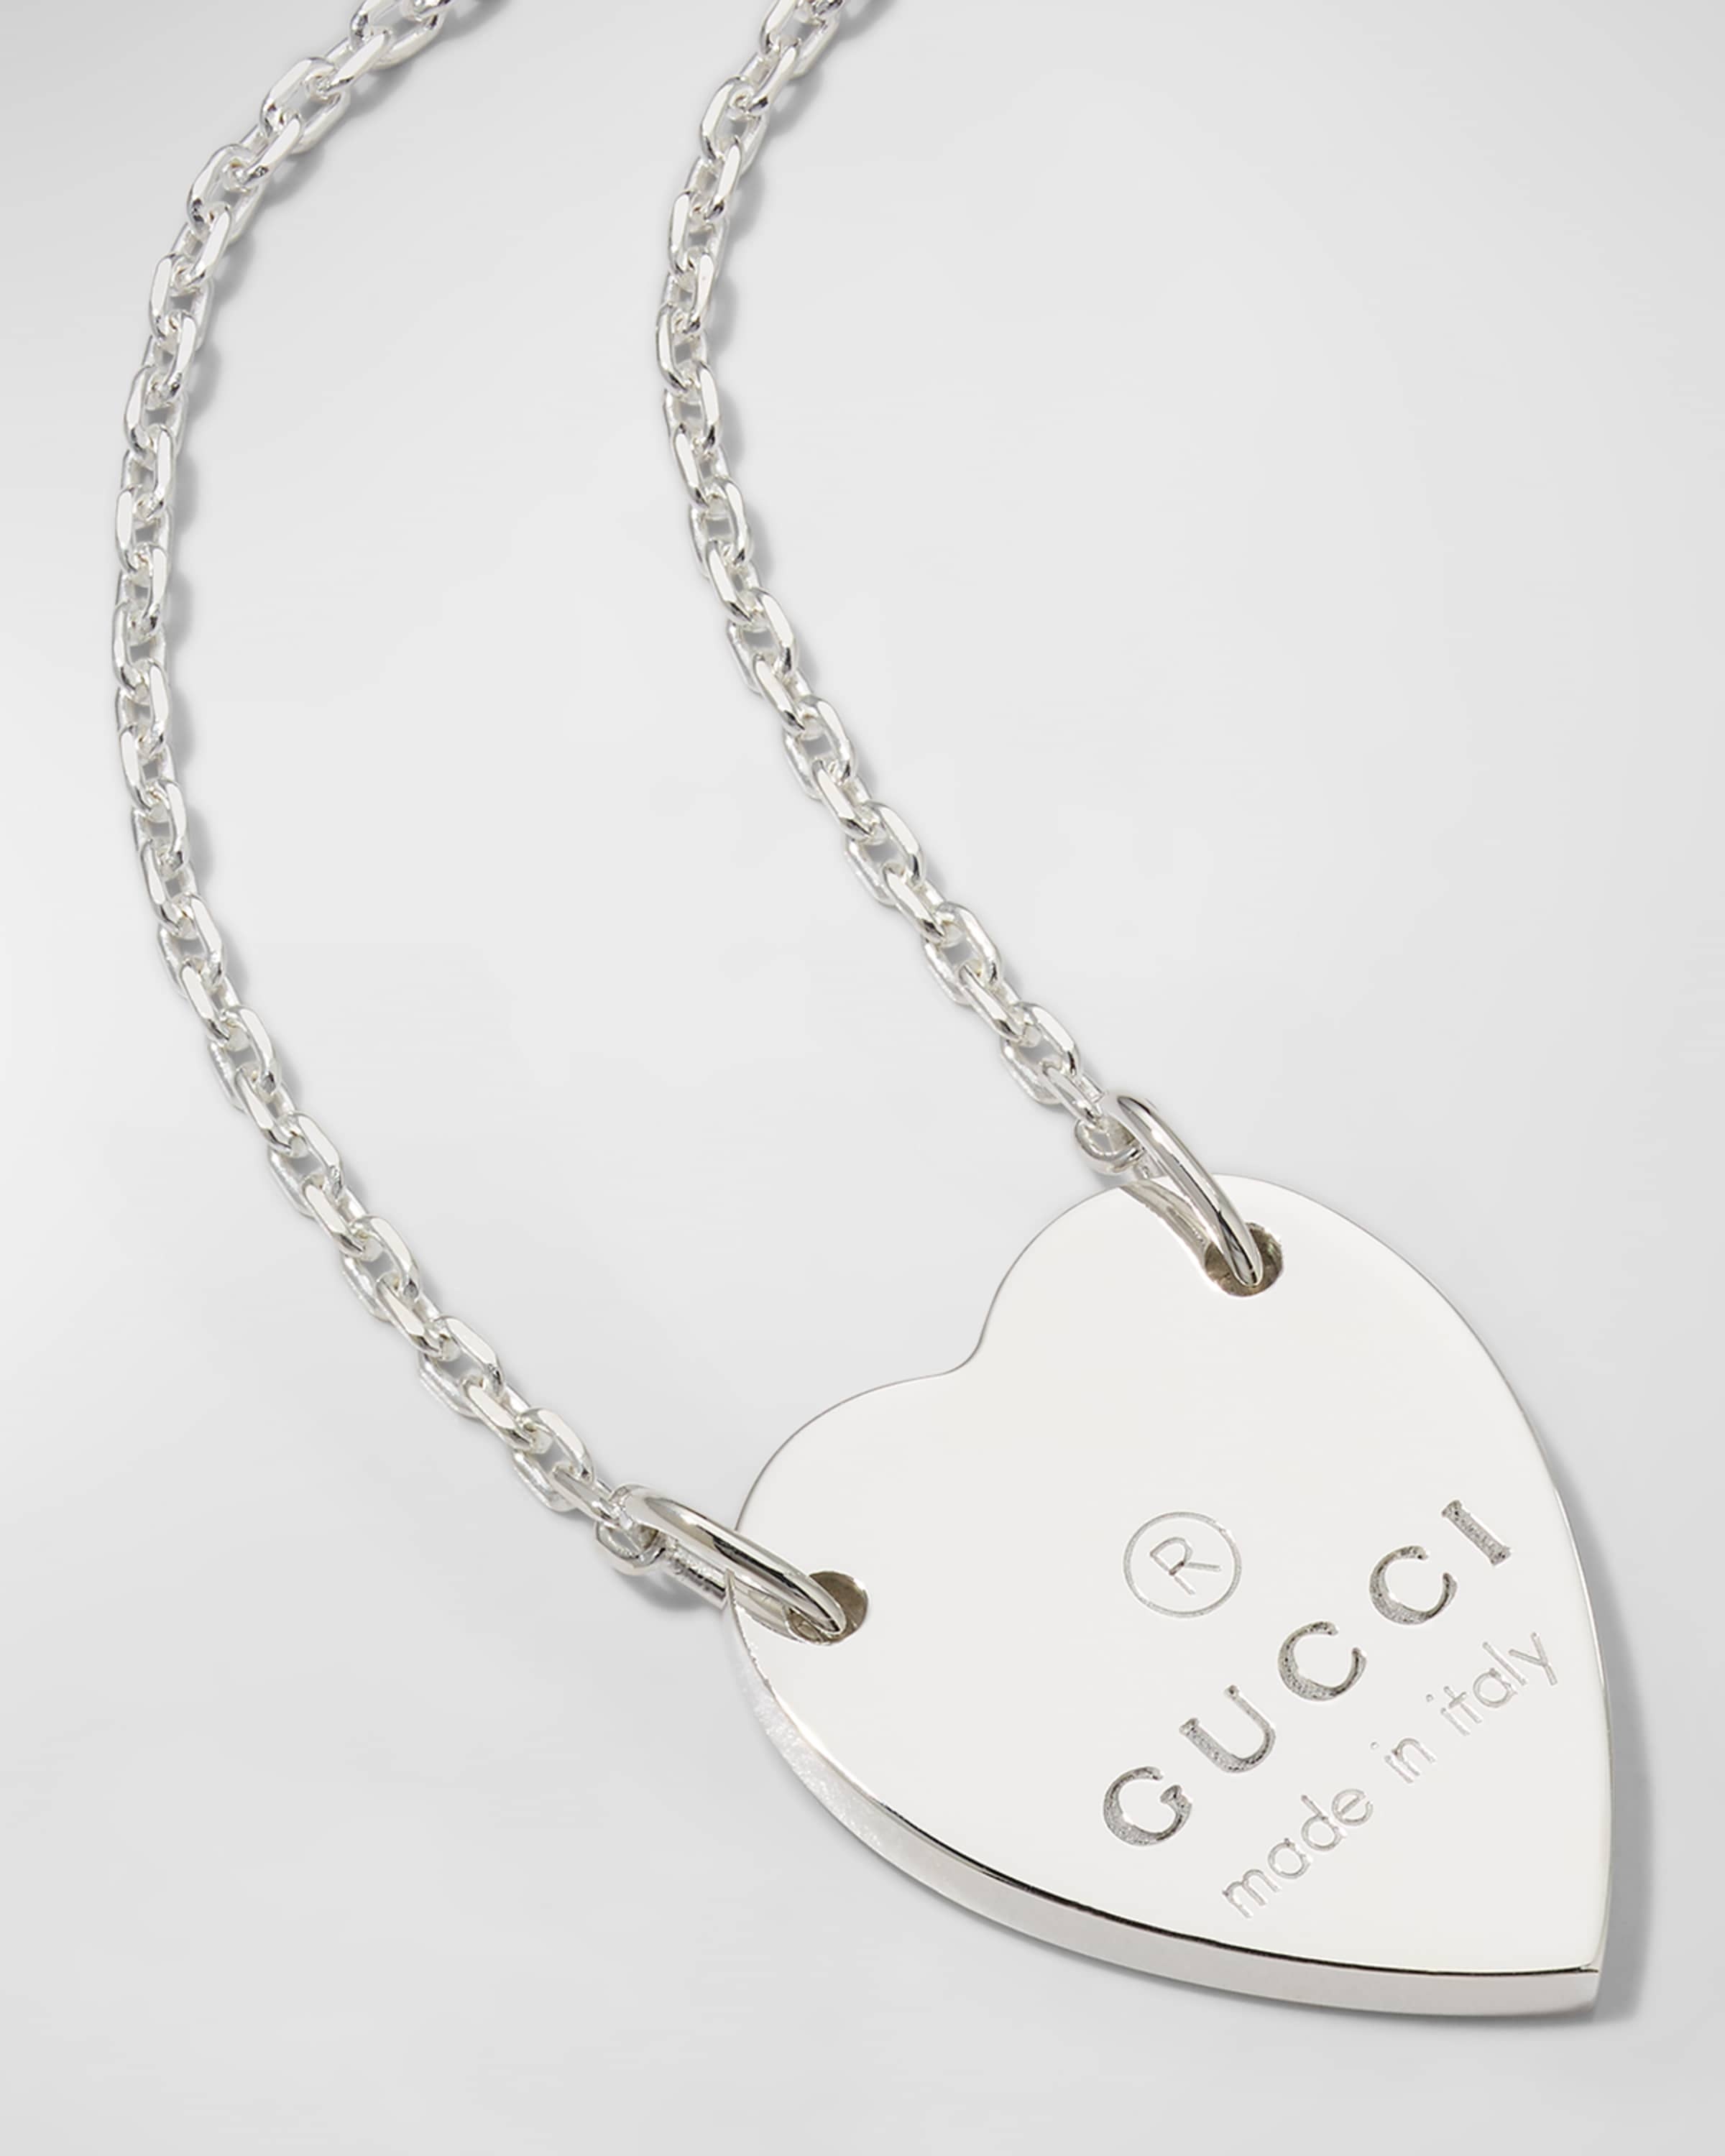 Engraved Heart Trademark Necklace - 4